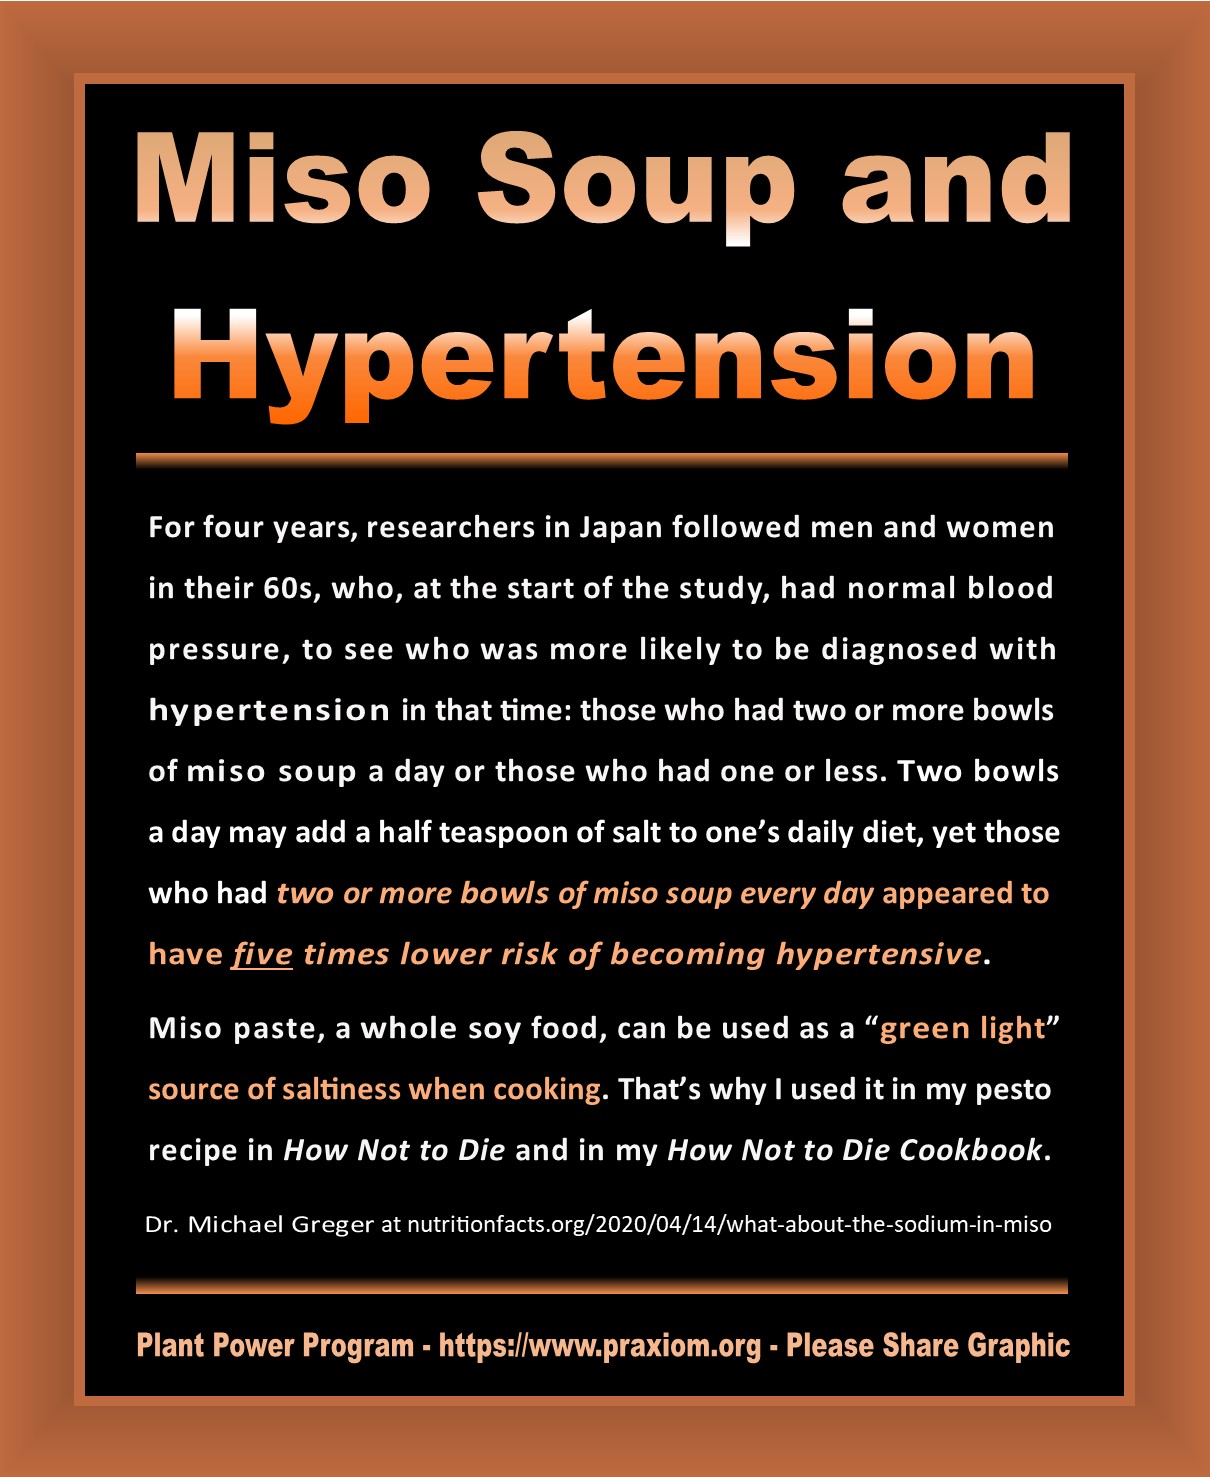 Miso Soup and Hypertension - Dr. Michael Greger